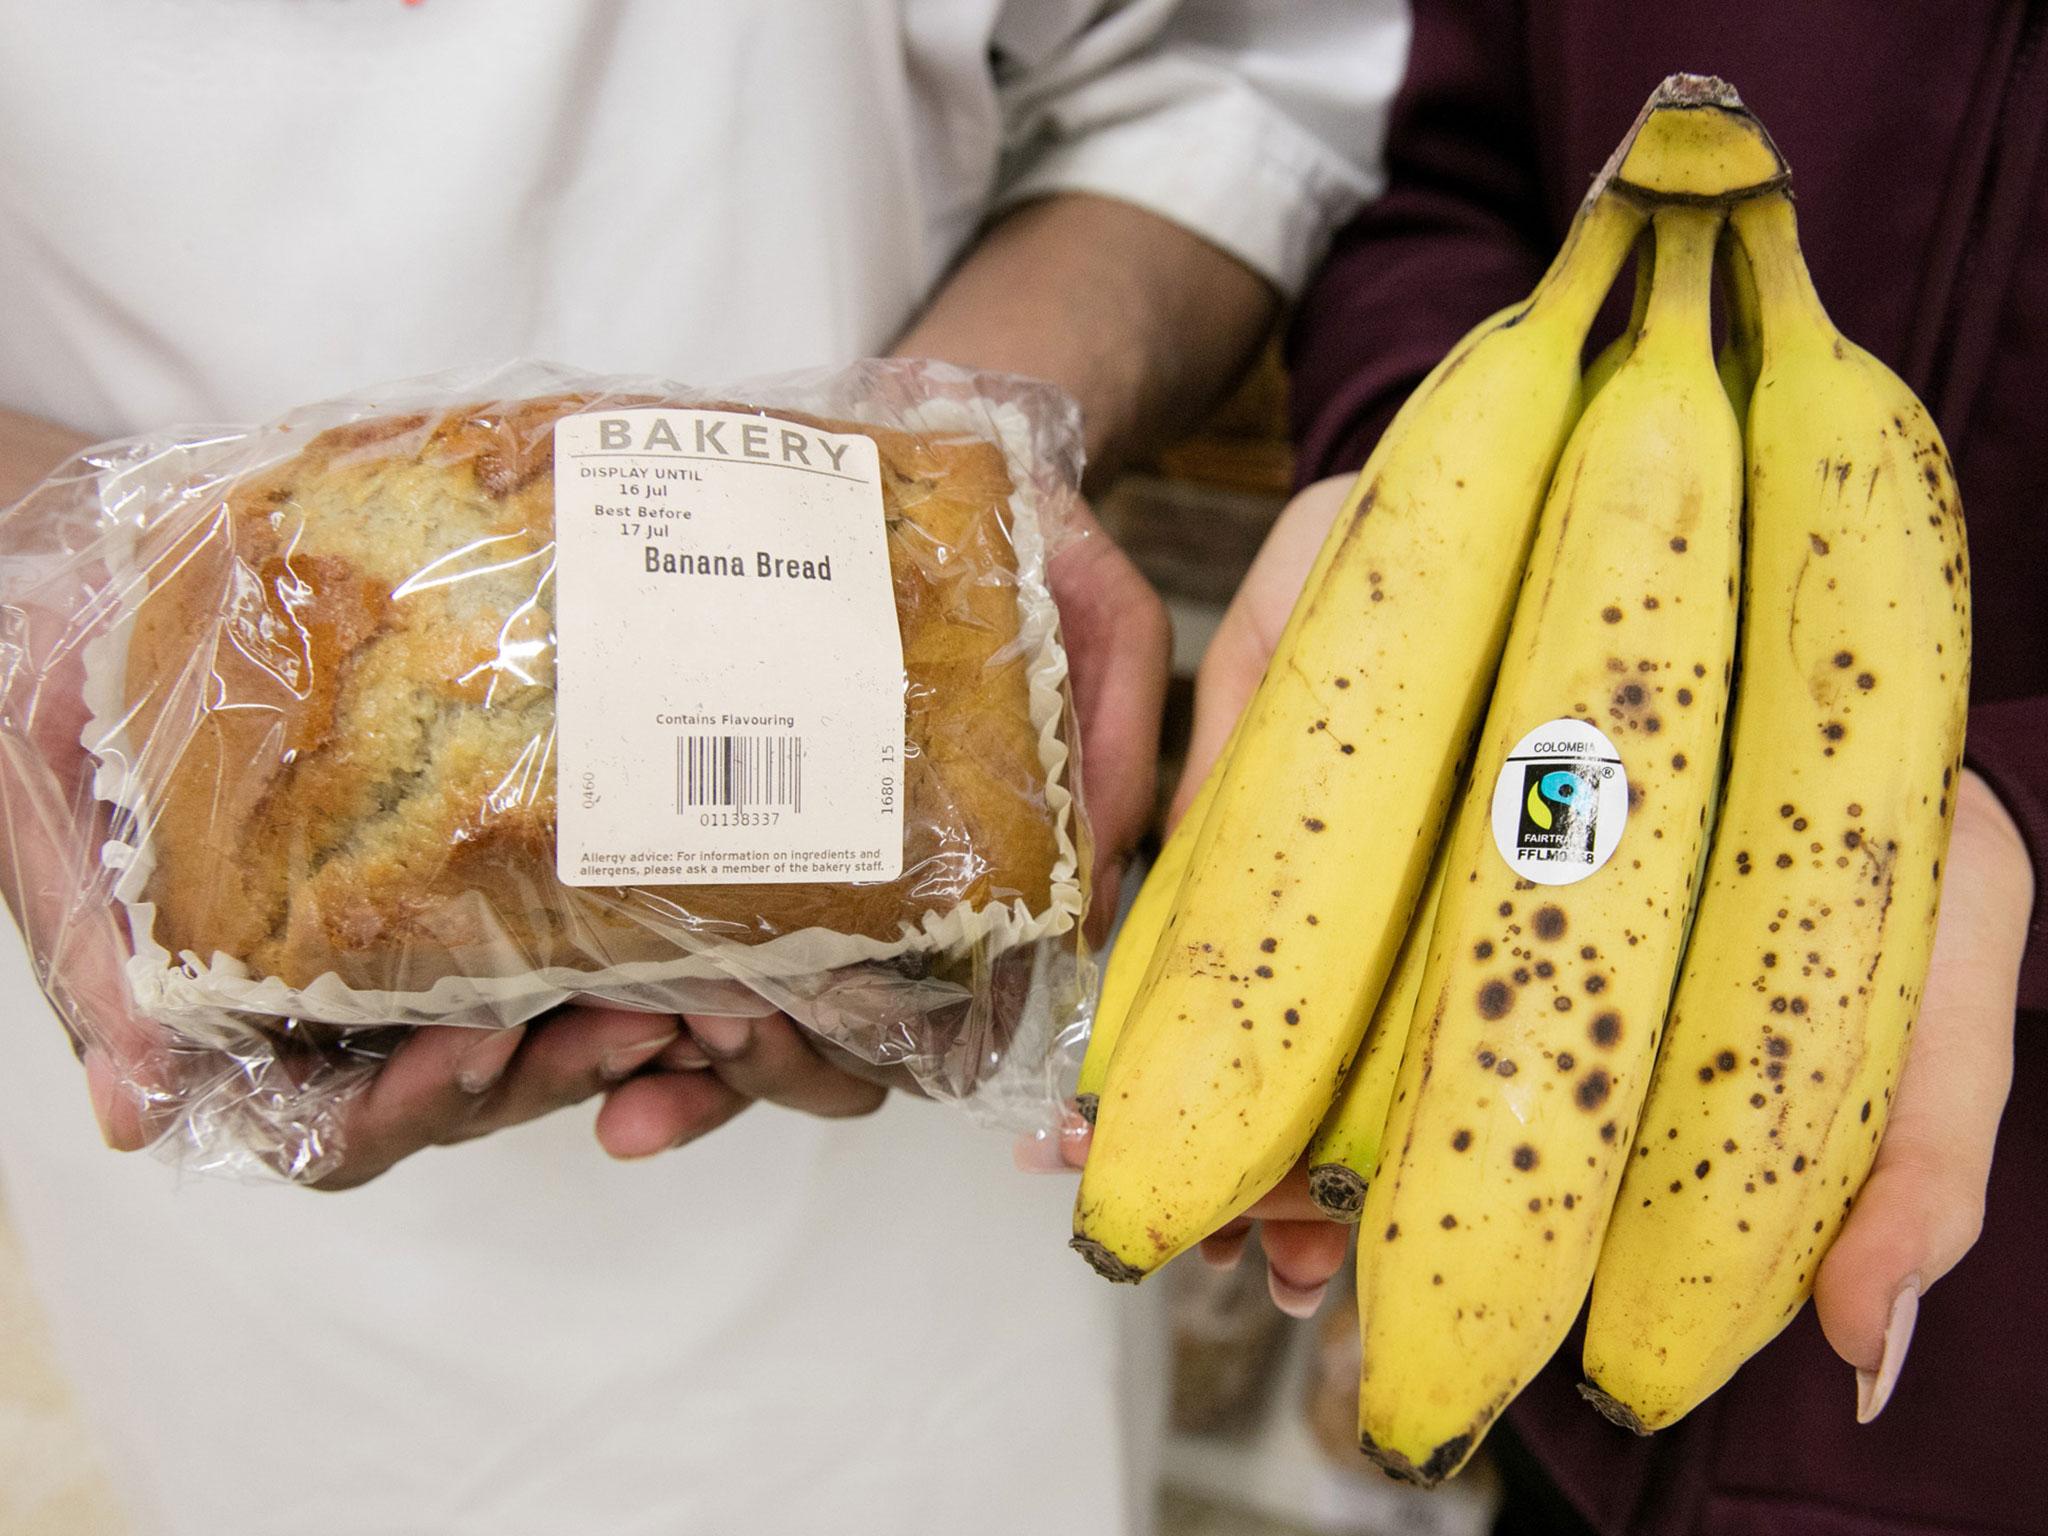 British Shoppers Throw 1 4 Million Bananas Away Every Day New Figures